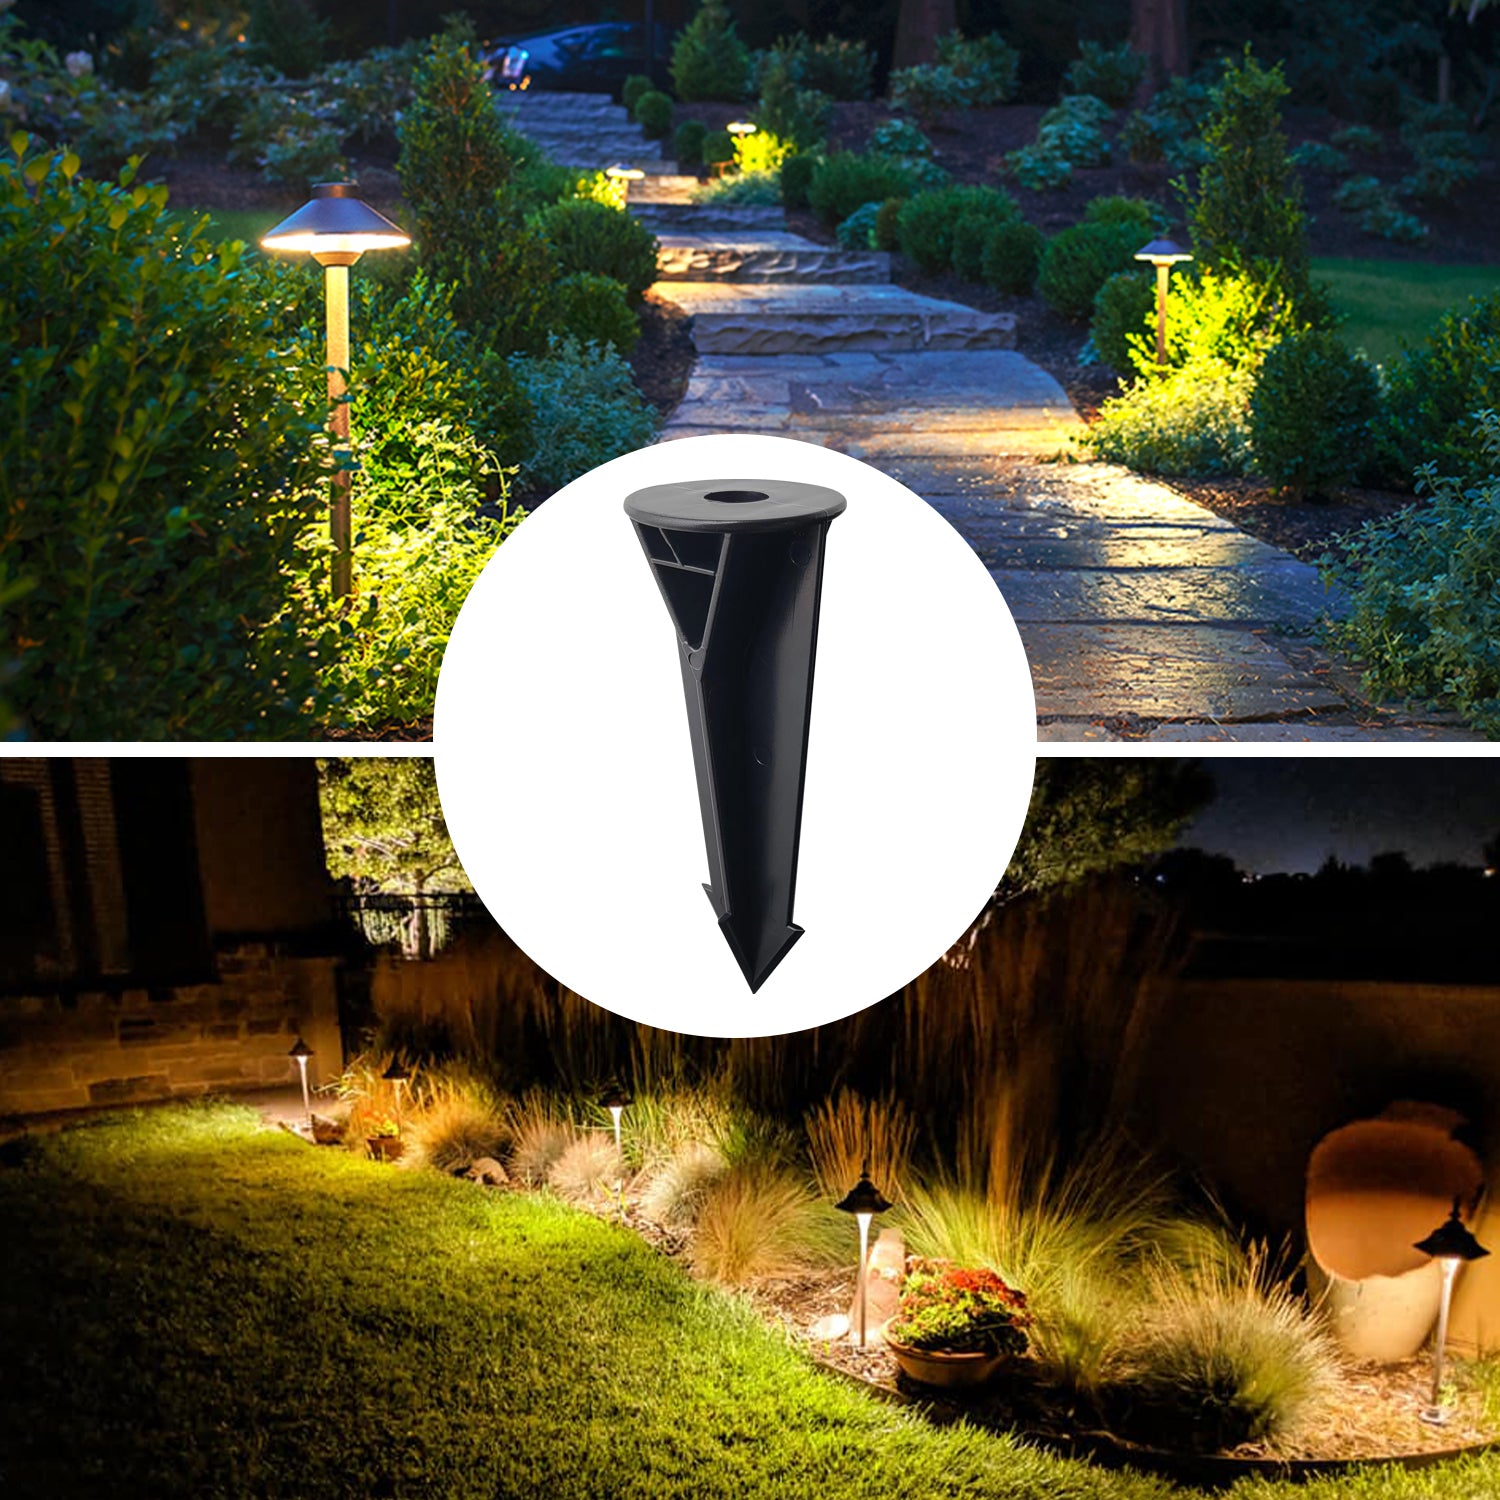 Collage of outdoor garden path lit with landscape lights and backyard garden with night lighting; close-up of a black PVC landscape light ground stake spike in the center.